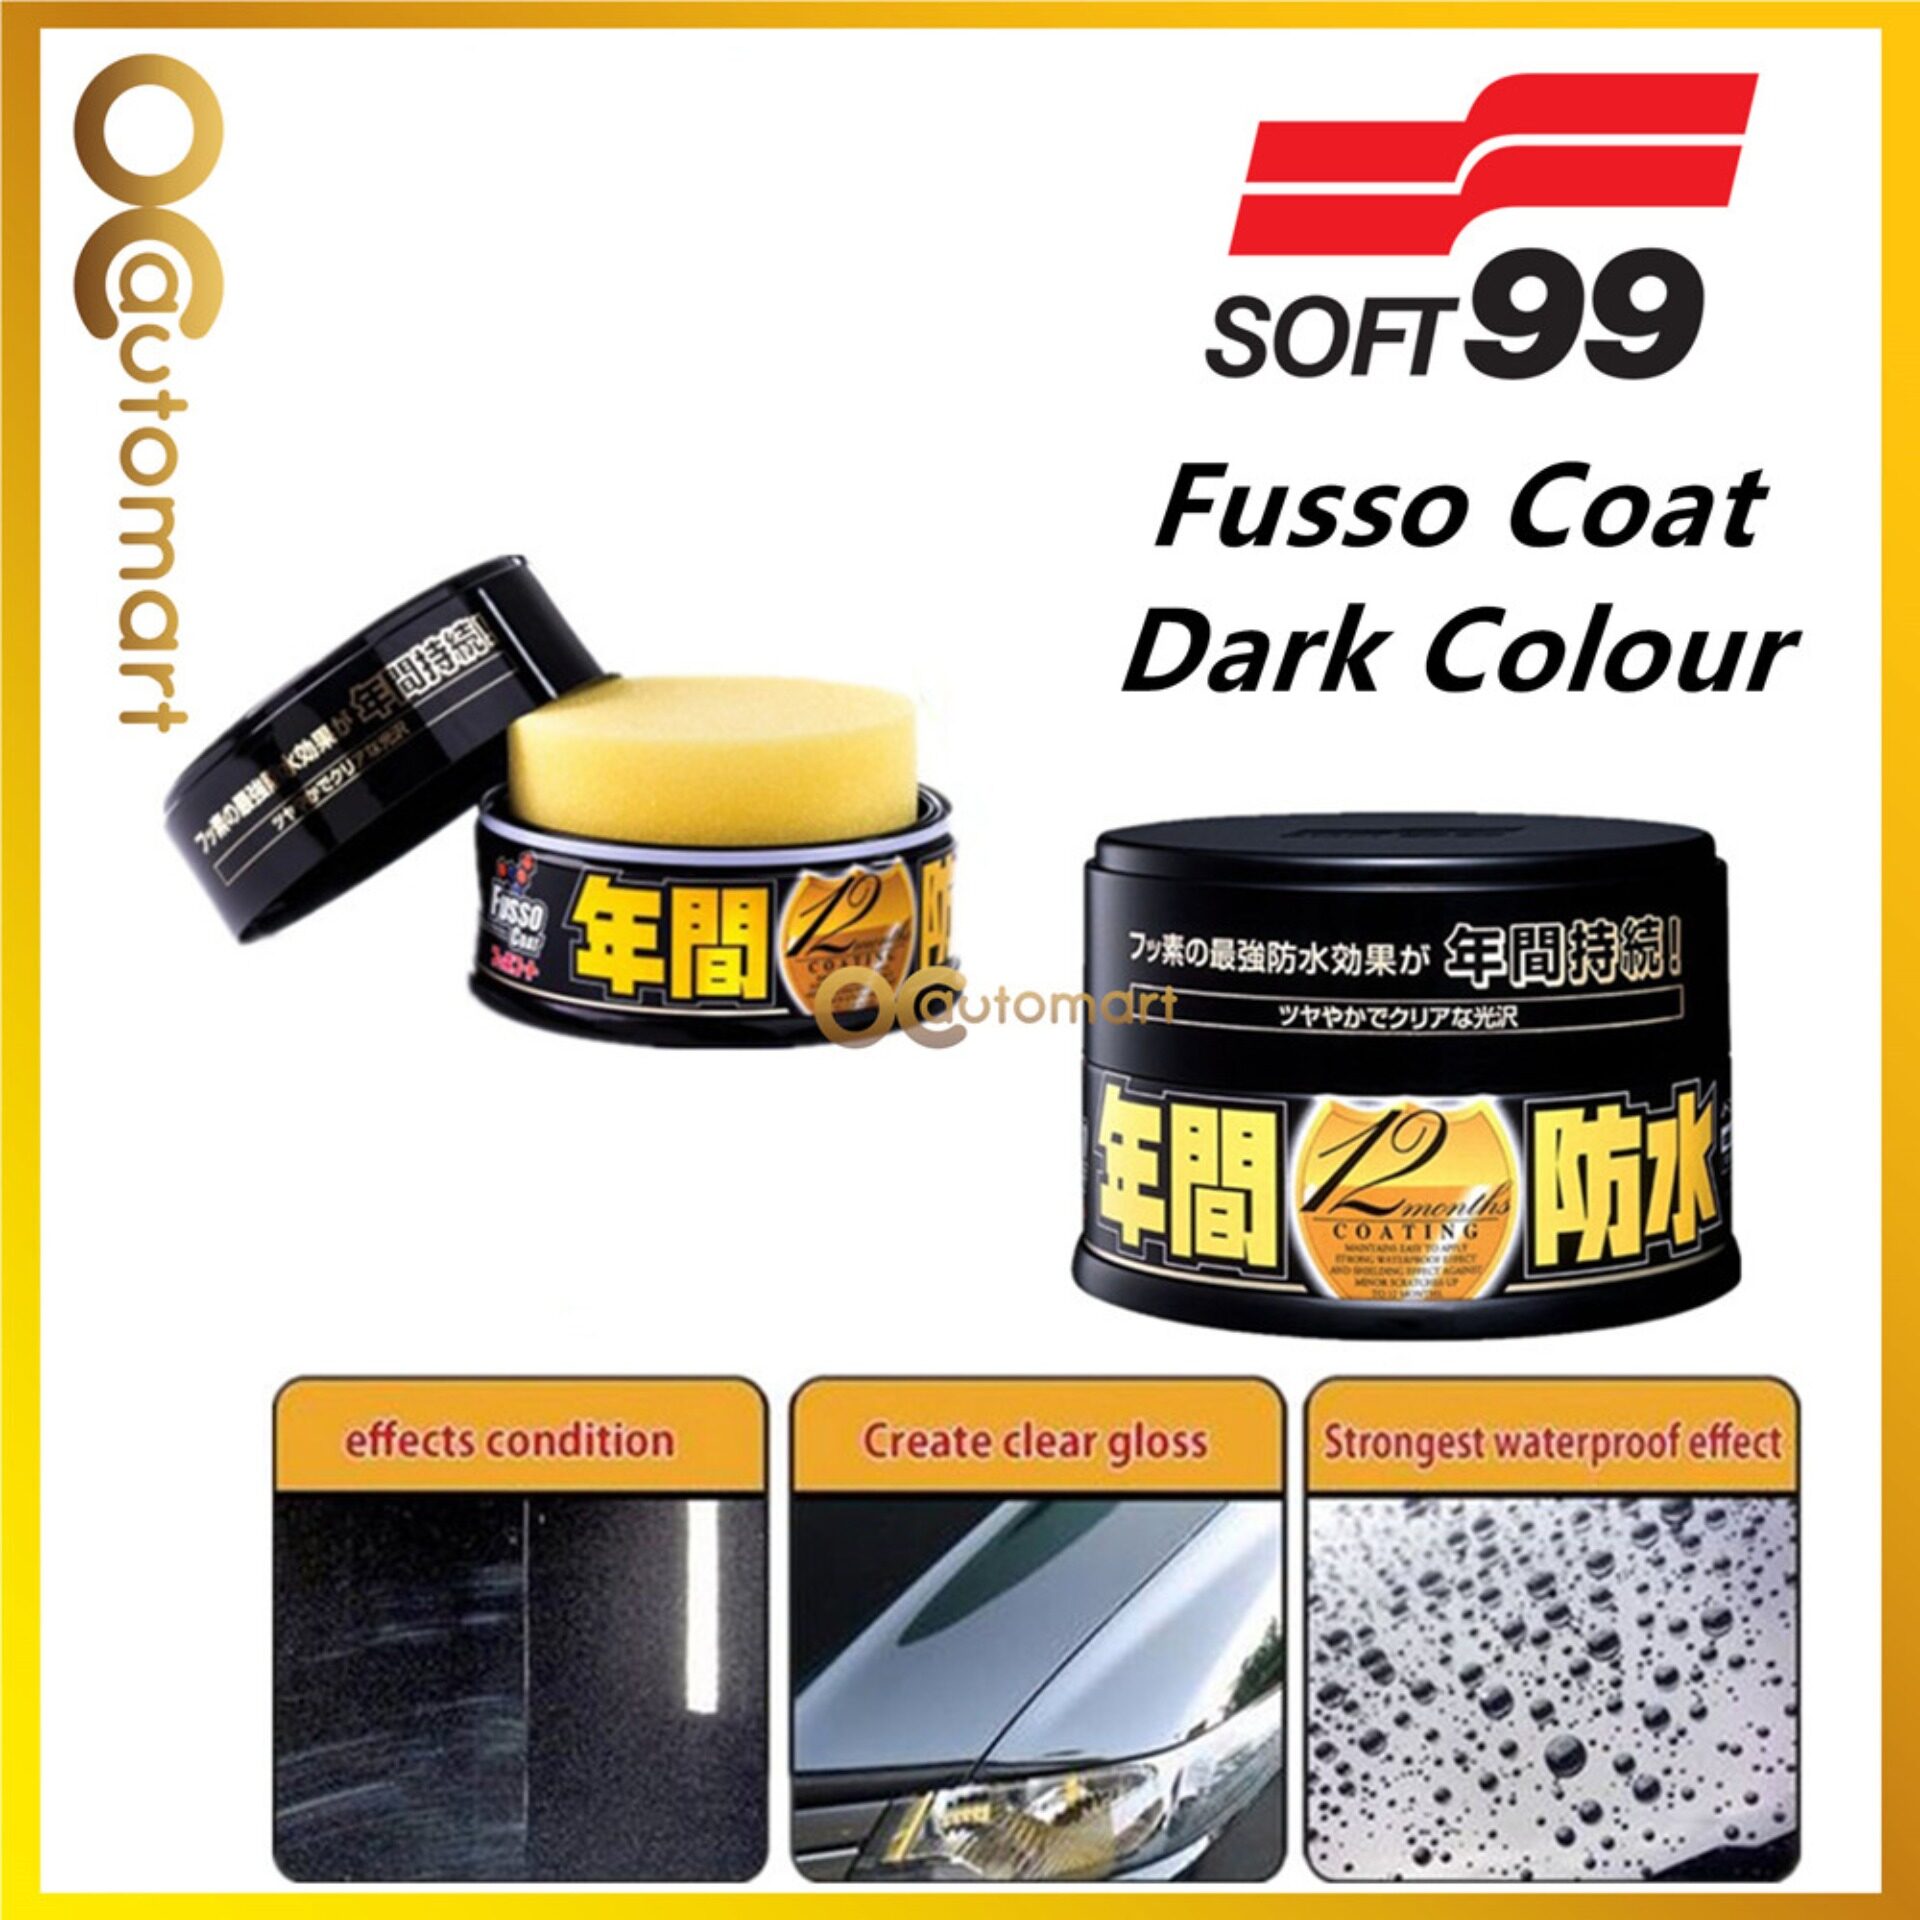 ( Free Gift ) Soft 99 / Soft99 Fusso Coat 12 Months Dark Color Wax - 200g